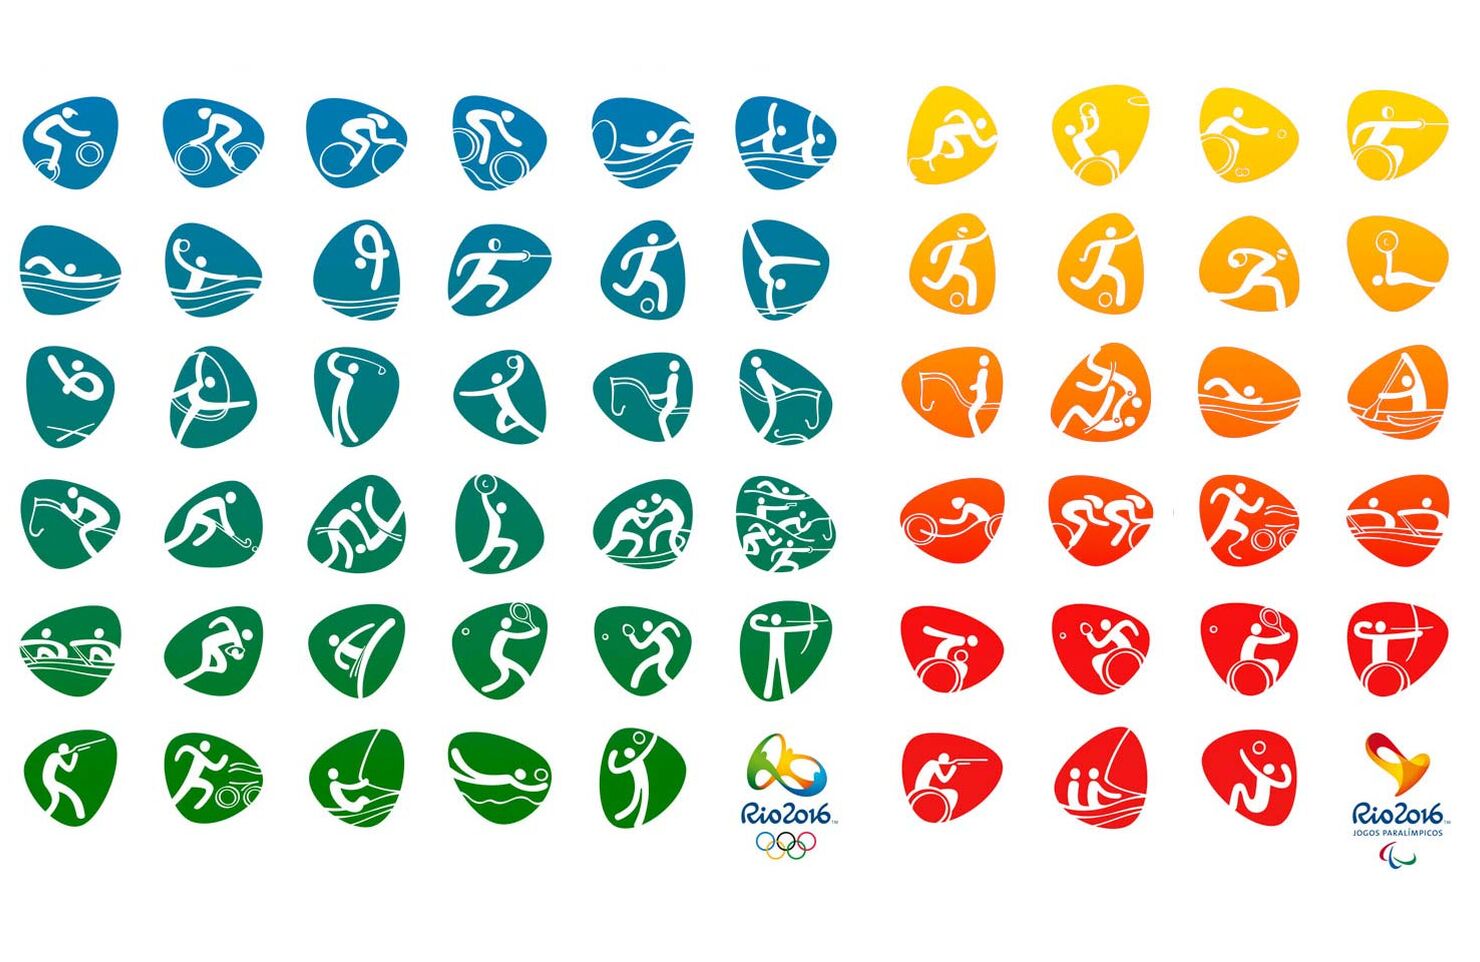 Rio 2016 Olympic and Paralympic pictograms revealed | WDD